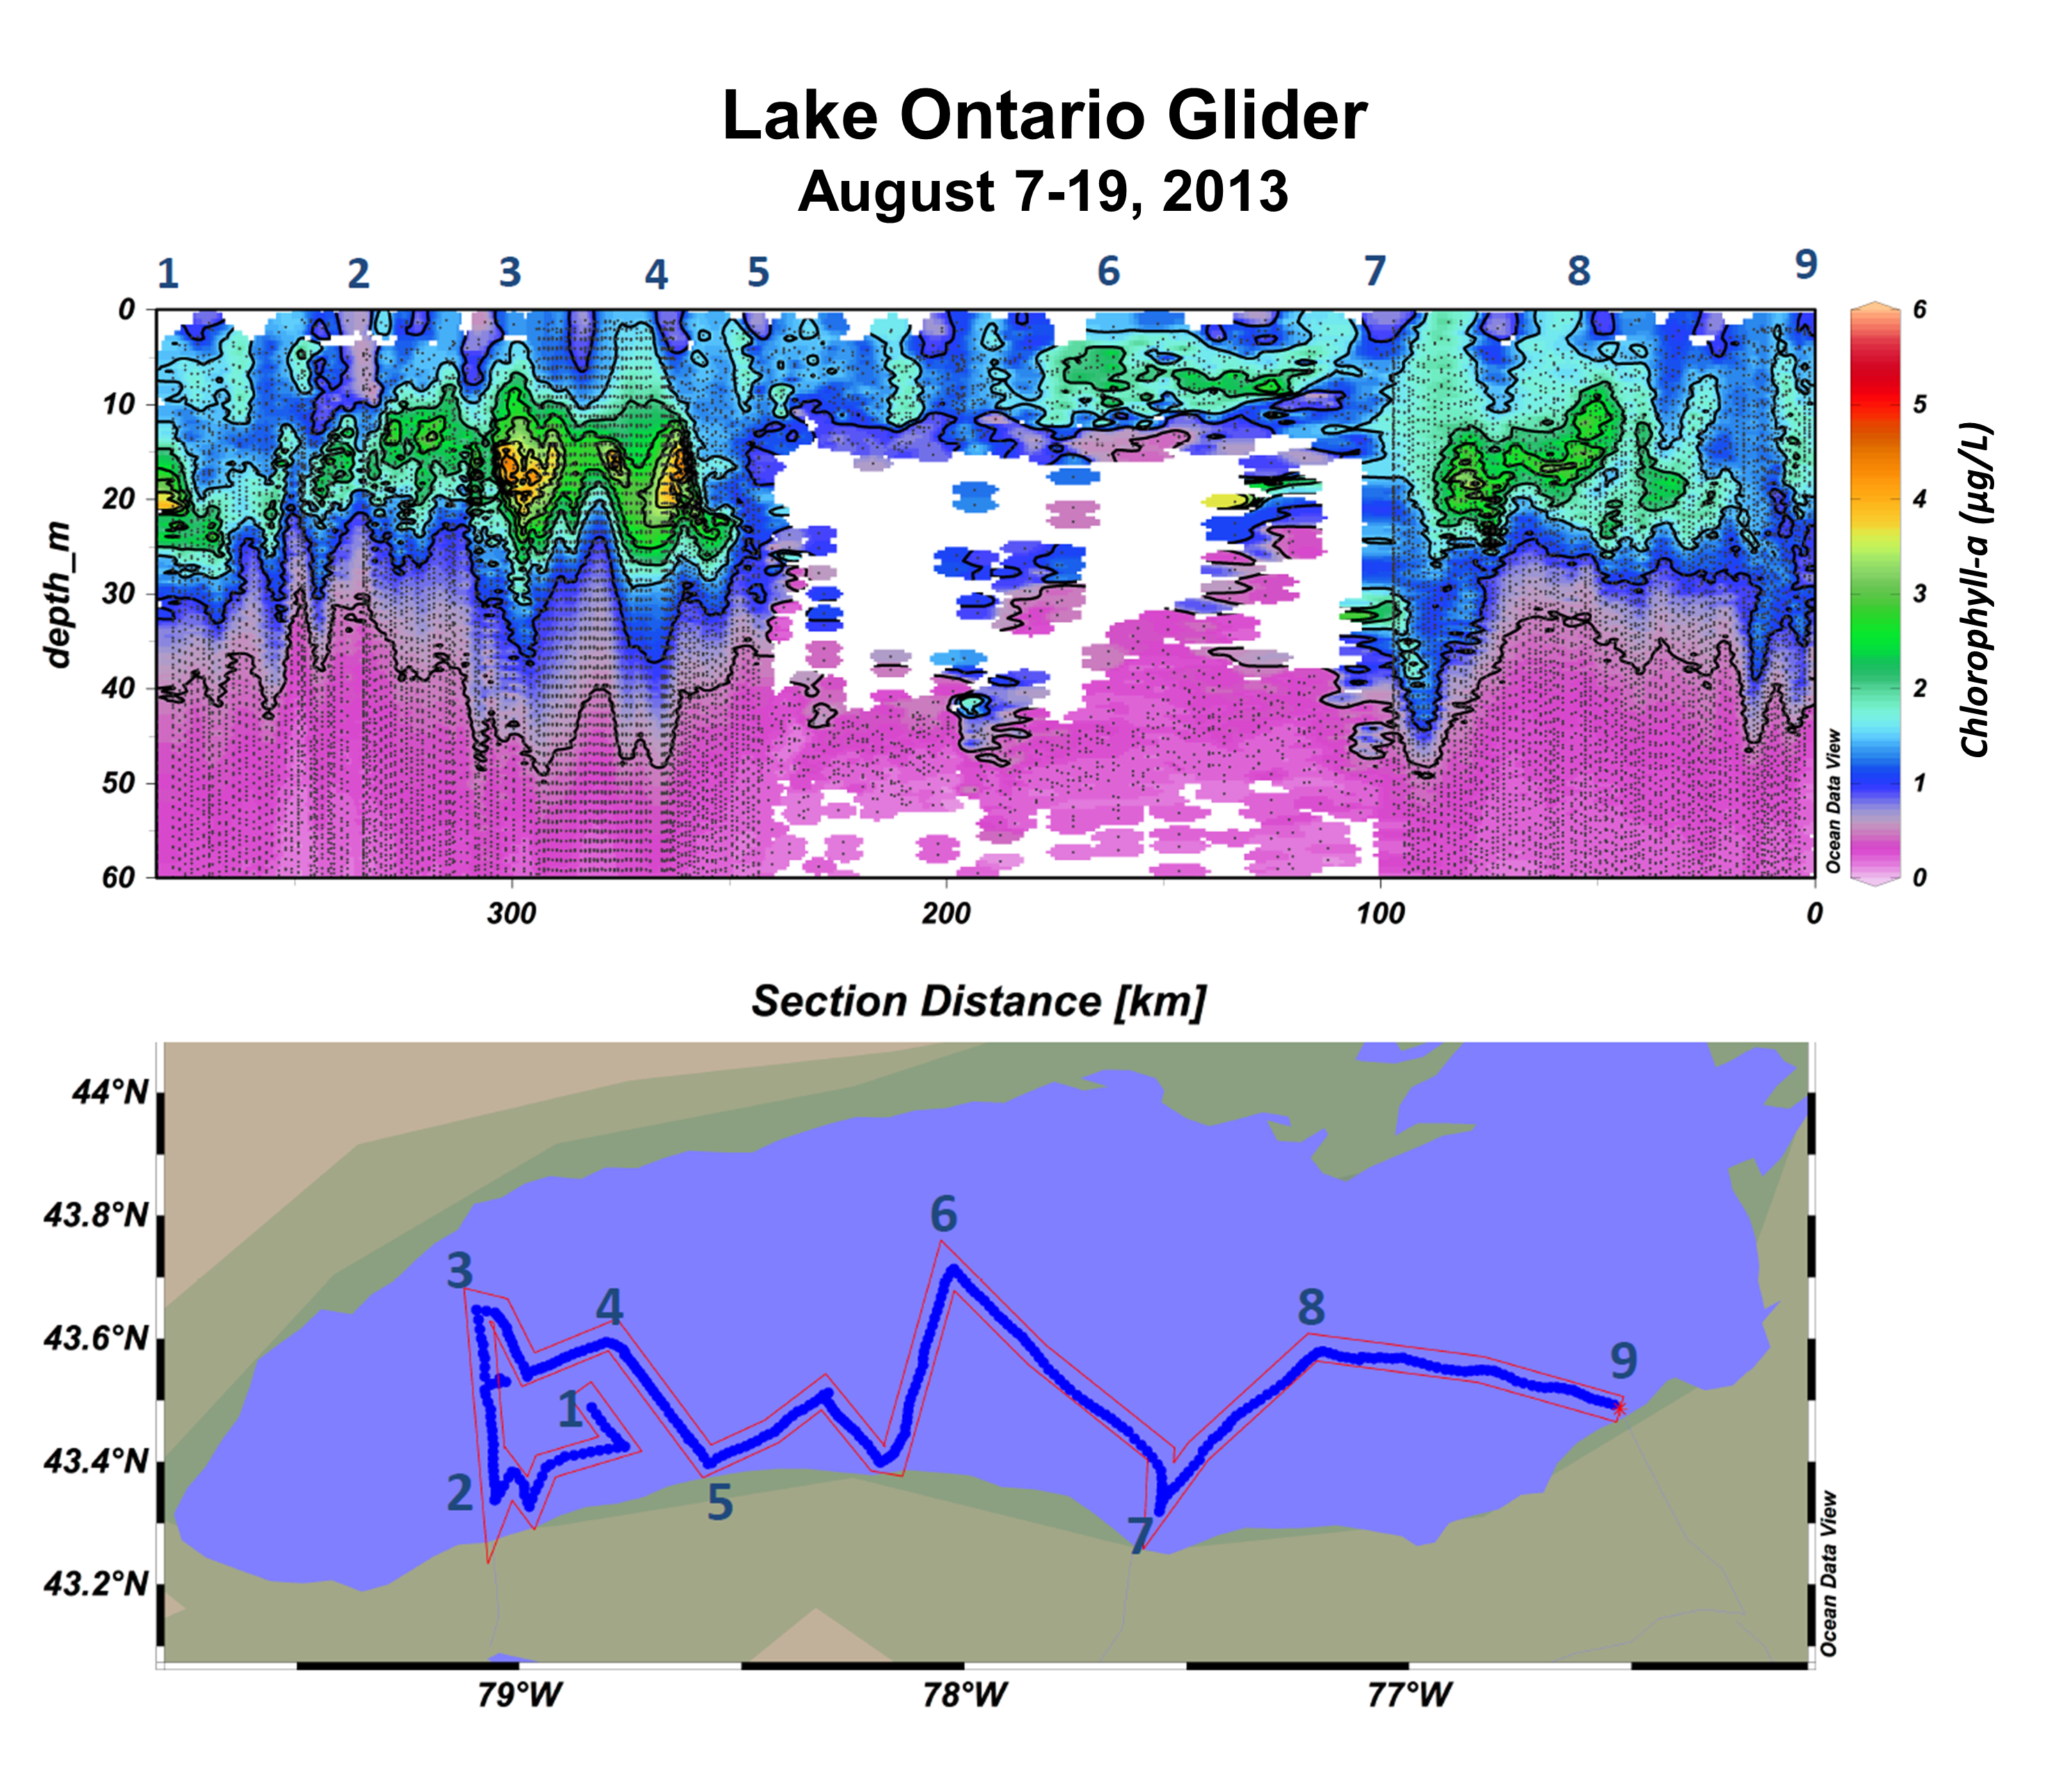 Top: Chloraphyll-a (µg/L) at depth across Lake Ontario, August 2013, as measured by an autonomous underwater glider. Bottom: Path of glider in Lake Ontario. 